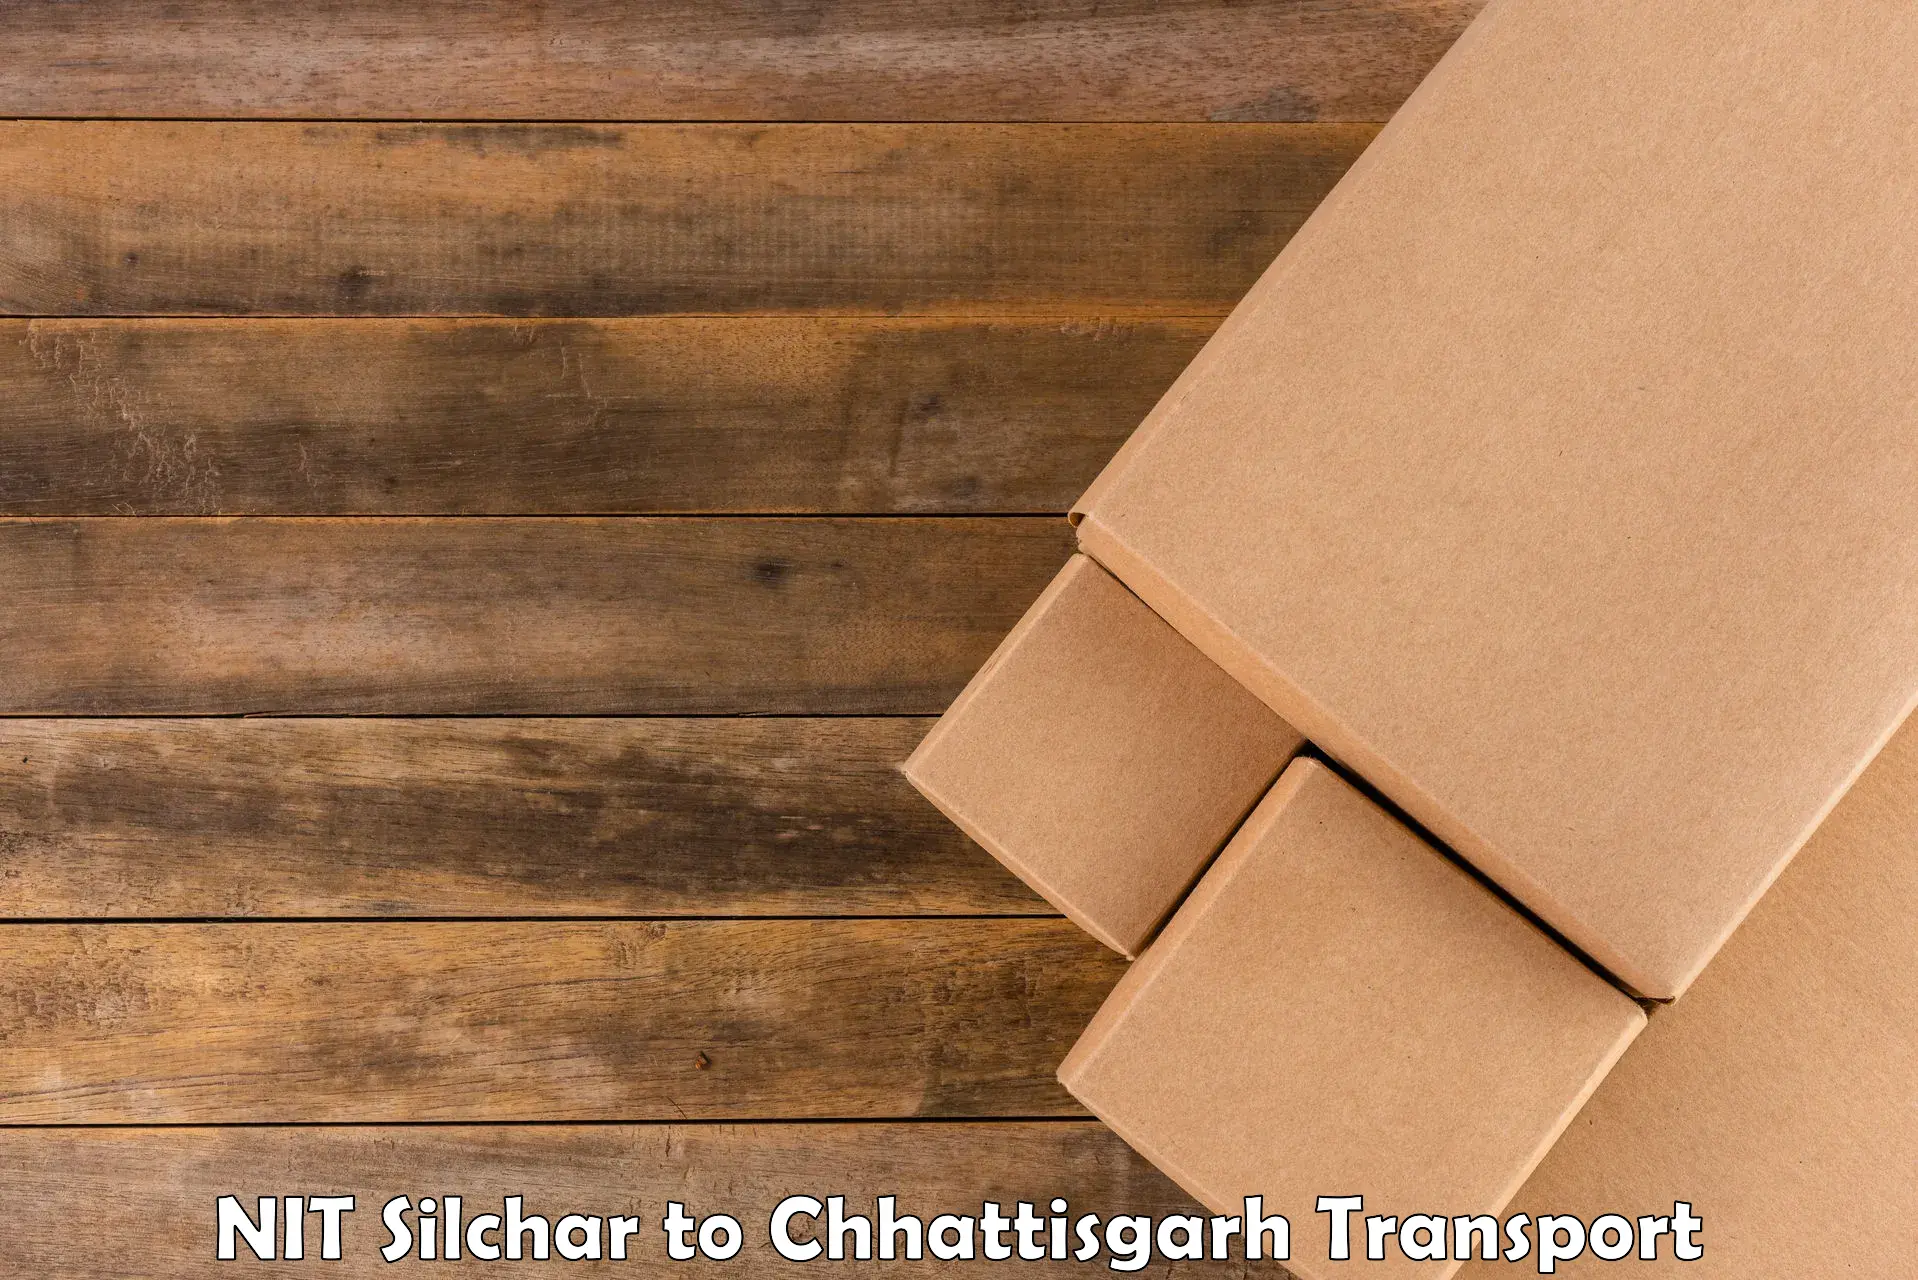 Two wheeler parcel service NIT Silchar to Dhamtari